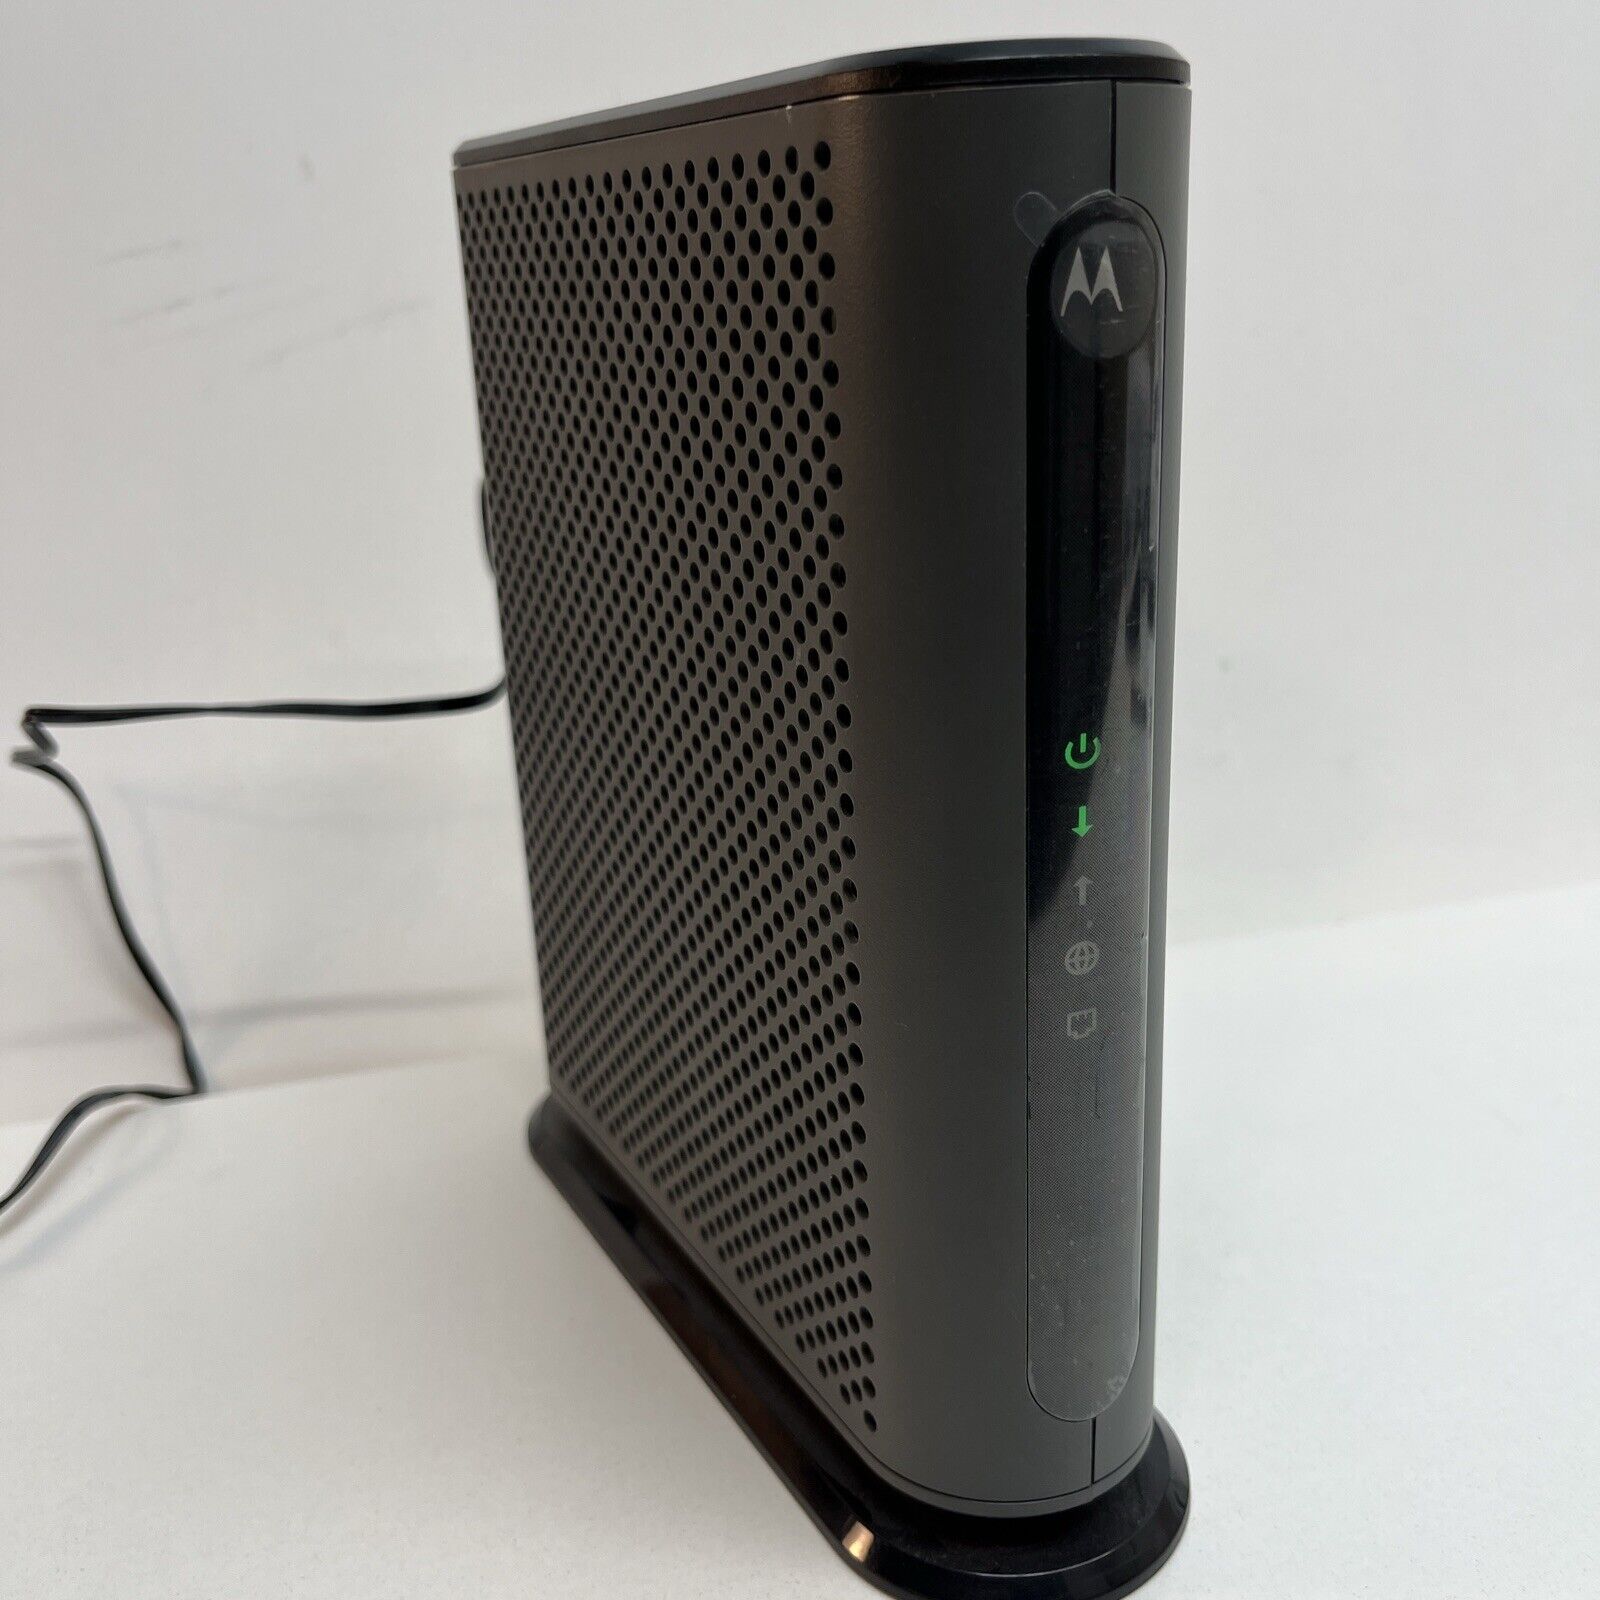 Motorola MB7621 24x8 Cable Modem DOCSIS 3.0 with Power Cable